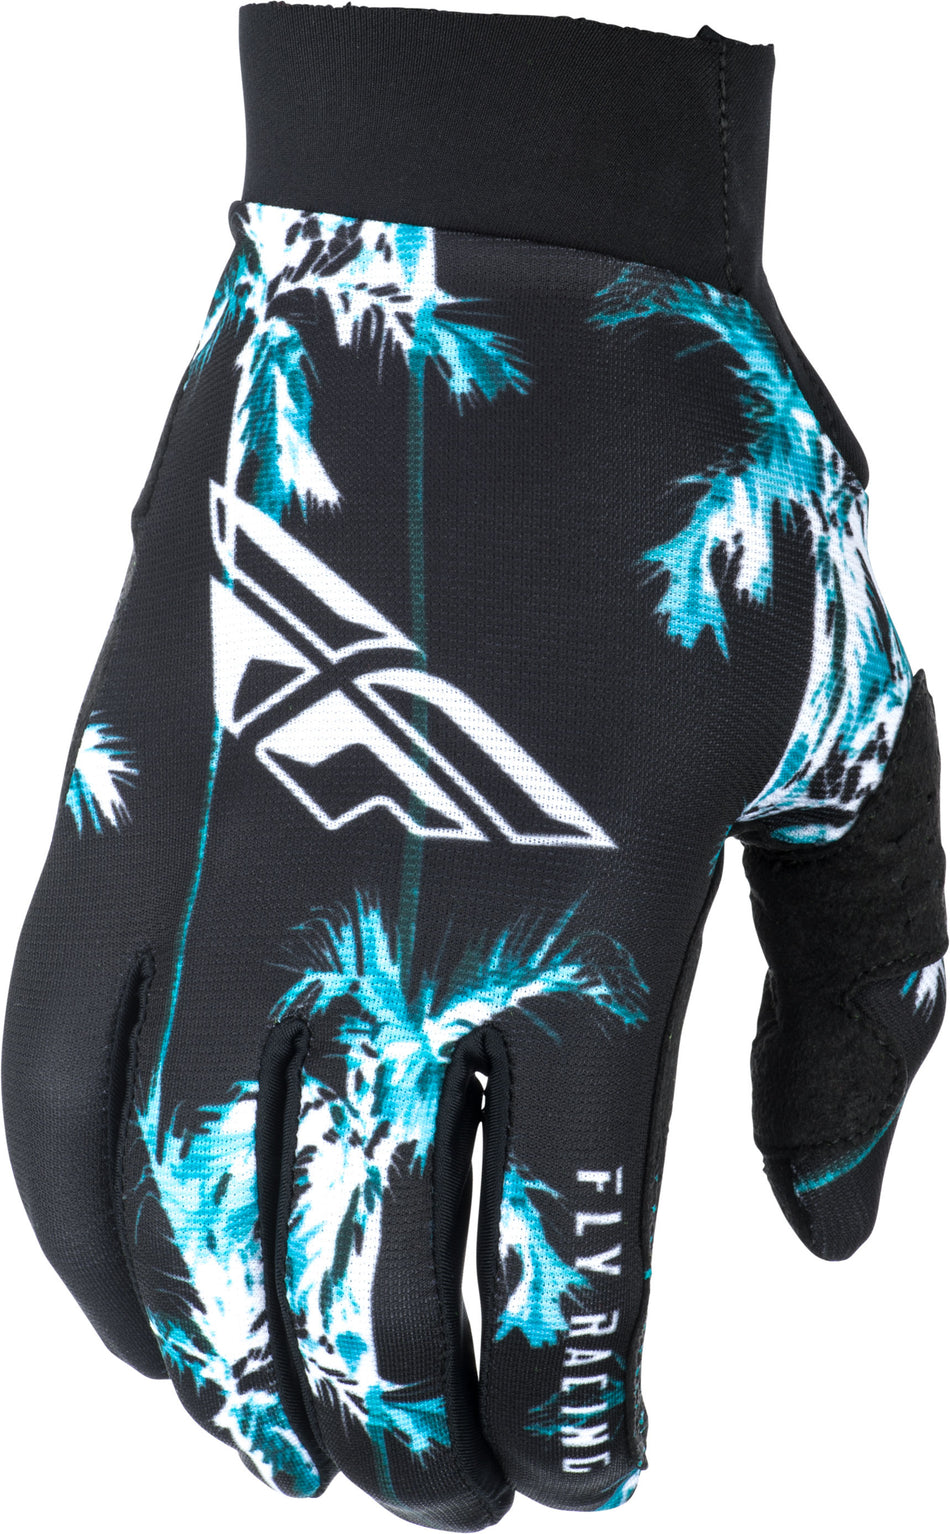 FLY RACING Pro Lite Paradise Gloves Teal/Black Sz 07 372-81907